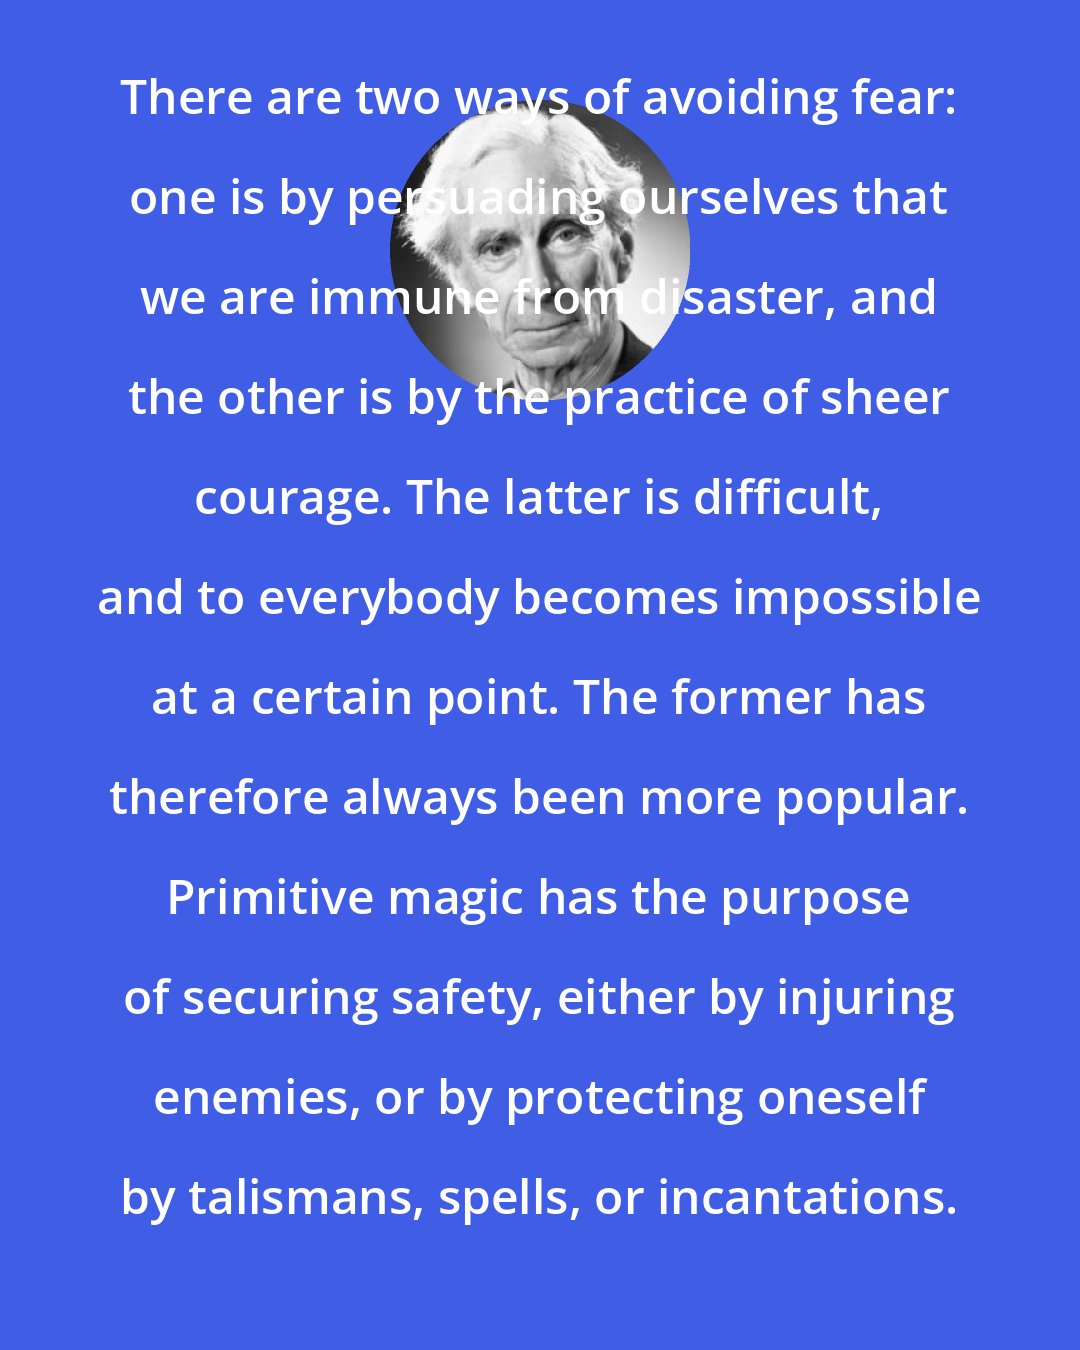 Bertrand Russell: There are two ways of avoiding fear: one is by persuading ourselves that we are immune from disaster, and the other is by the practice of sheer courage. The latter is difficult, and to everybody becomes impossible at a certain point. The former has therefore always been more popular. Primitive magic has the purpose of securing safety, either by injuring enemies, or by protecting oneself by talismans, spells, or incantations.